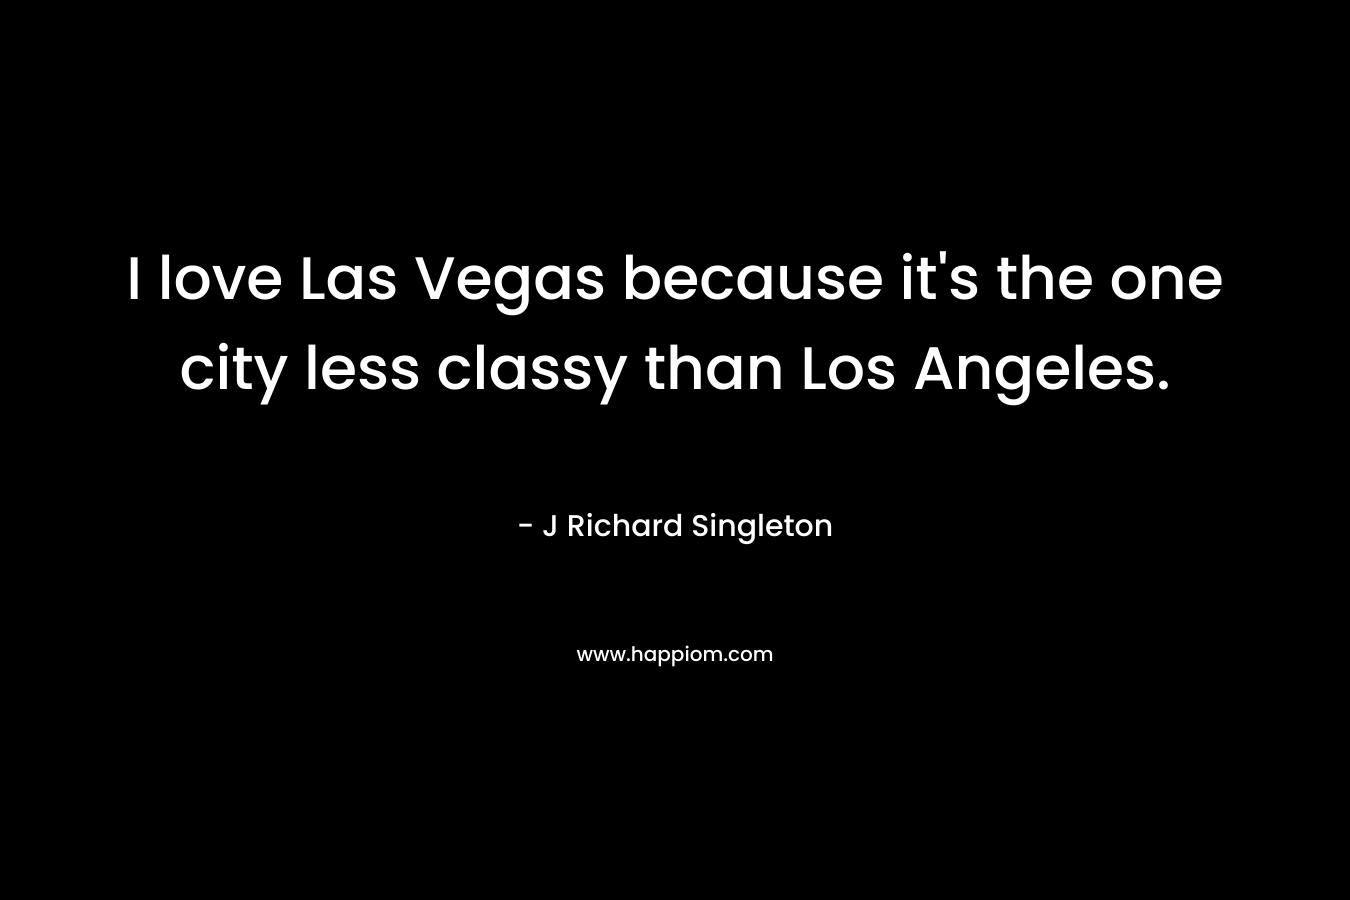 I love Las Vegas because it's the one city less classy than Los Angeles.